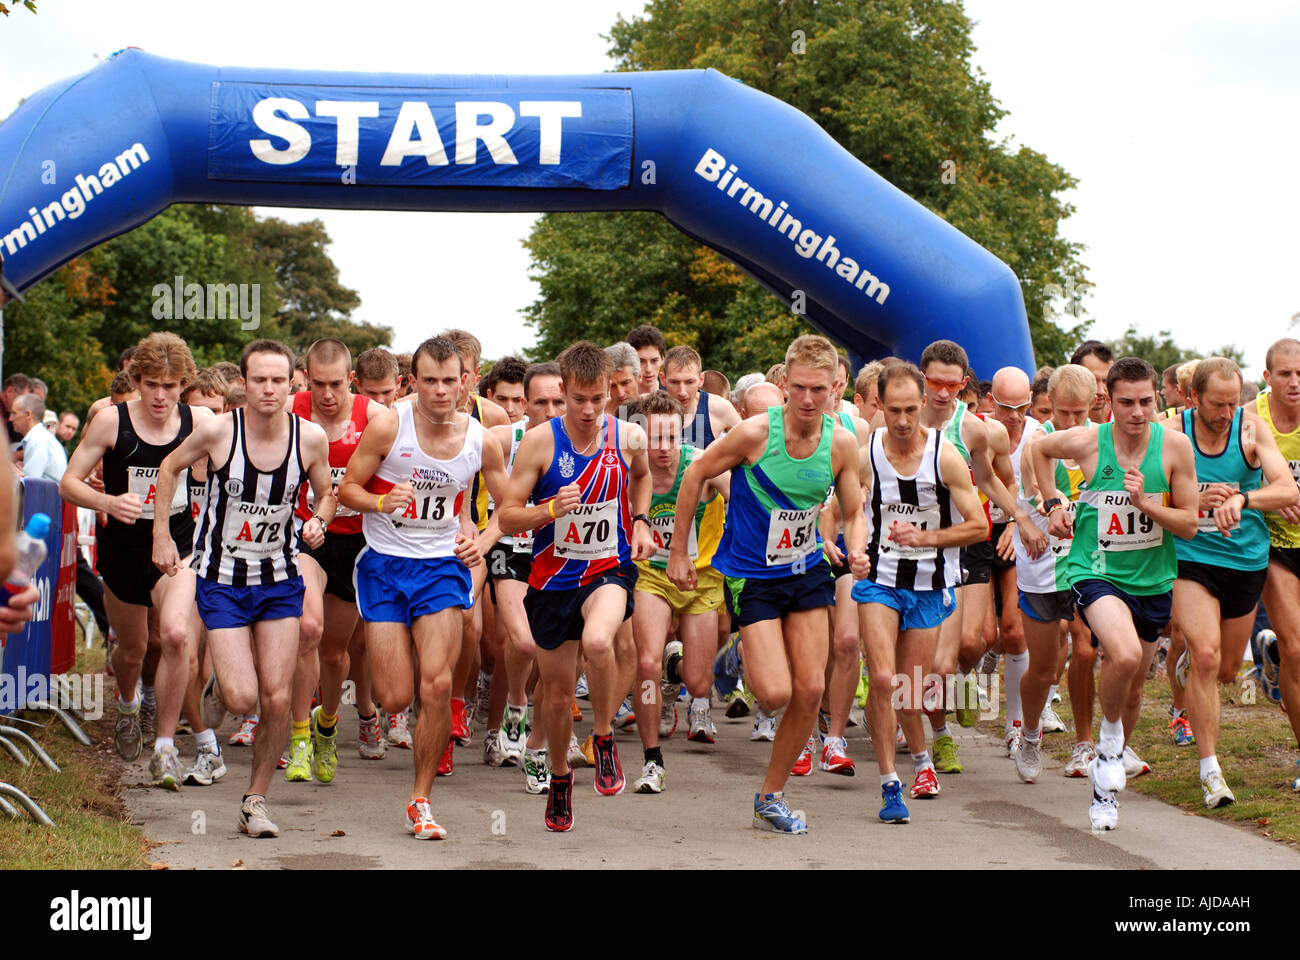 Start of men`s Midland 6 stage Road Relay race, Sutton Park, West